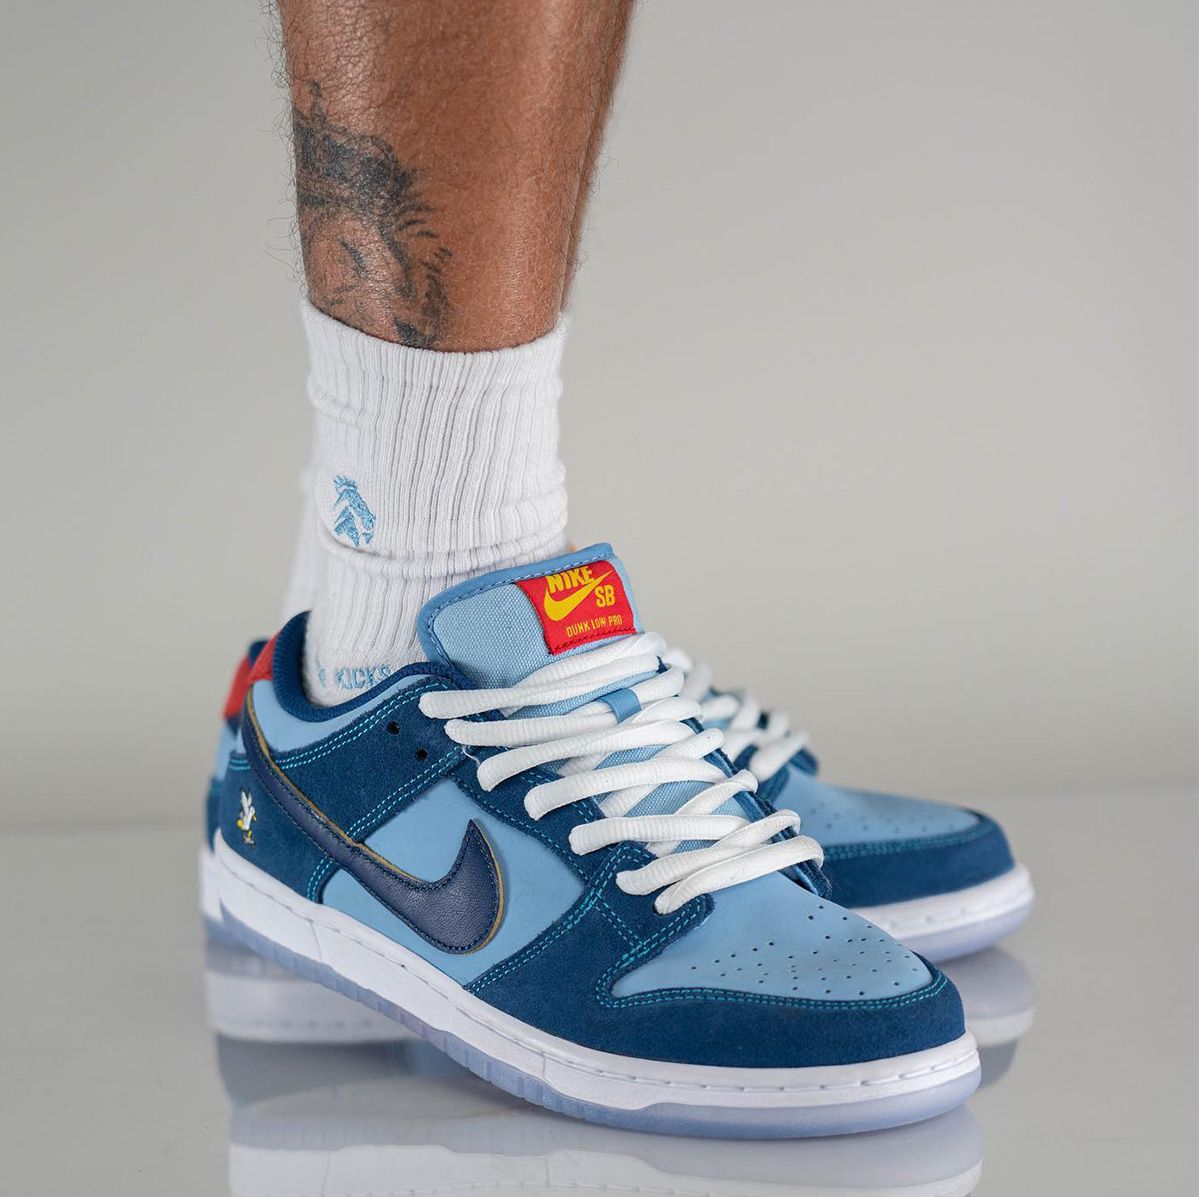 Where to Buy the Why So Sad? x Nike SB Dunk Low | HOUSE OF HEAT